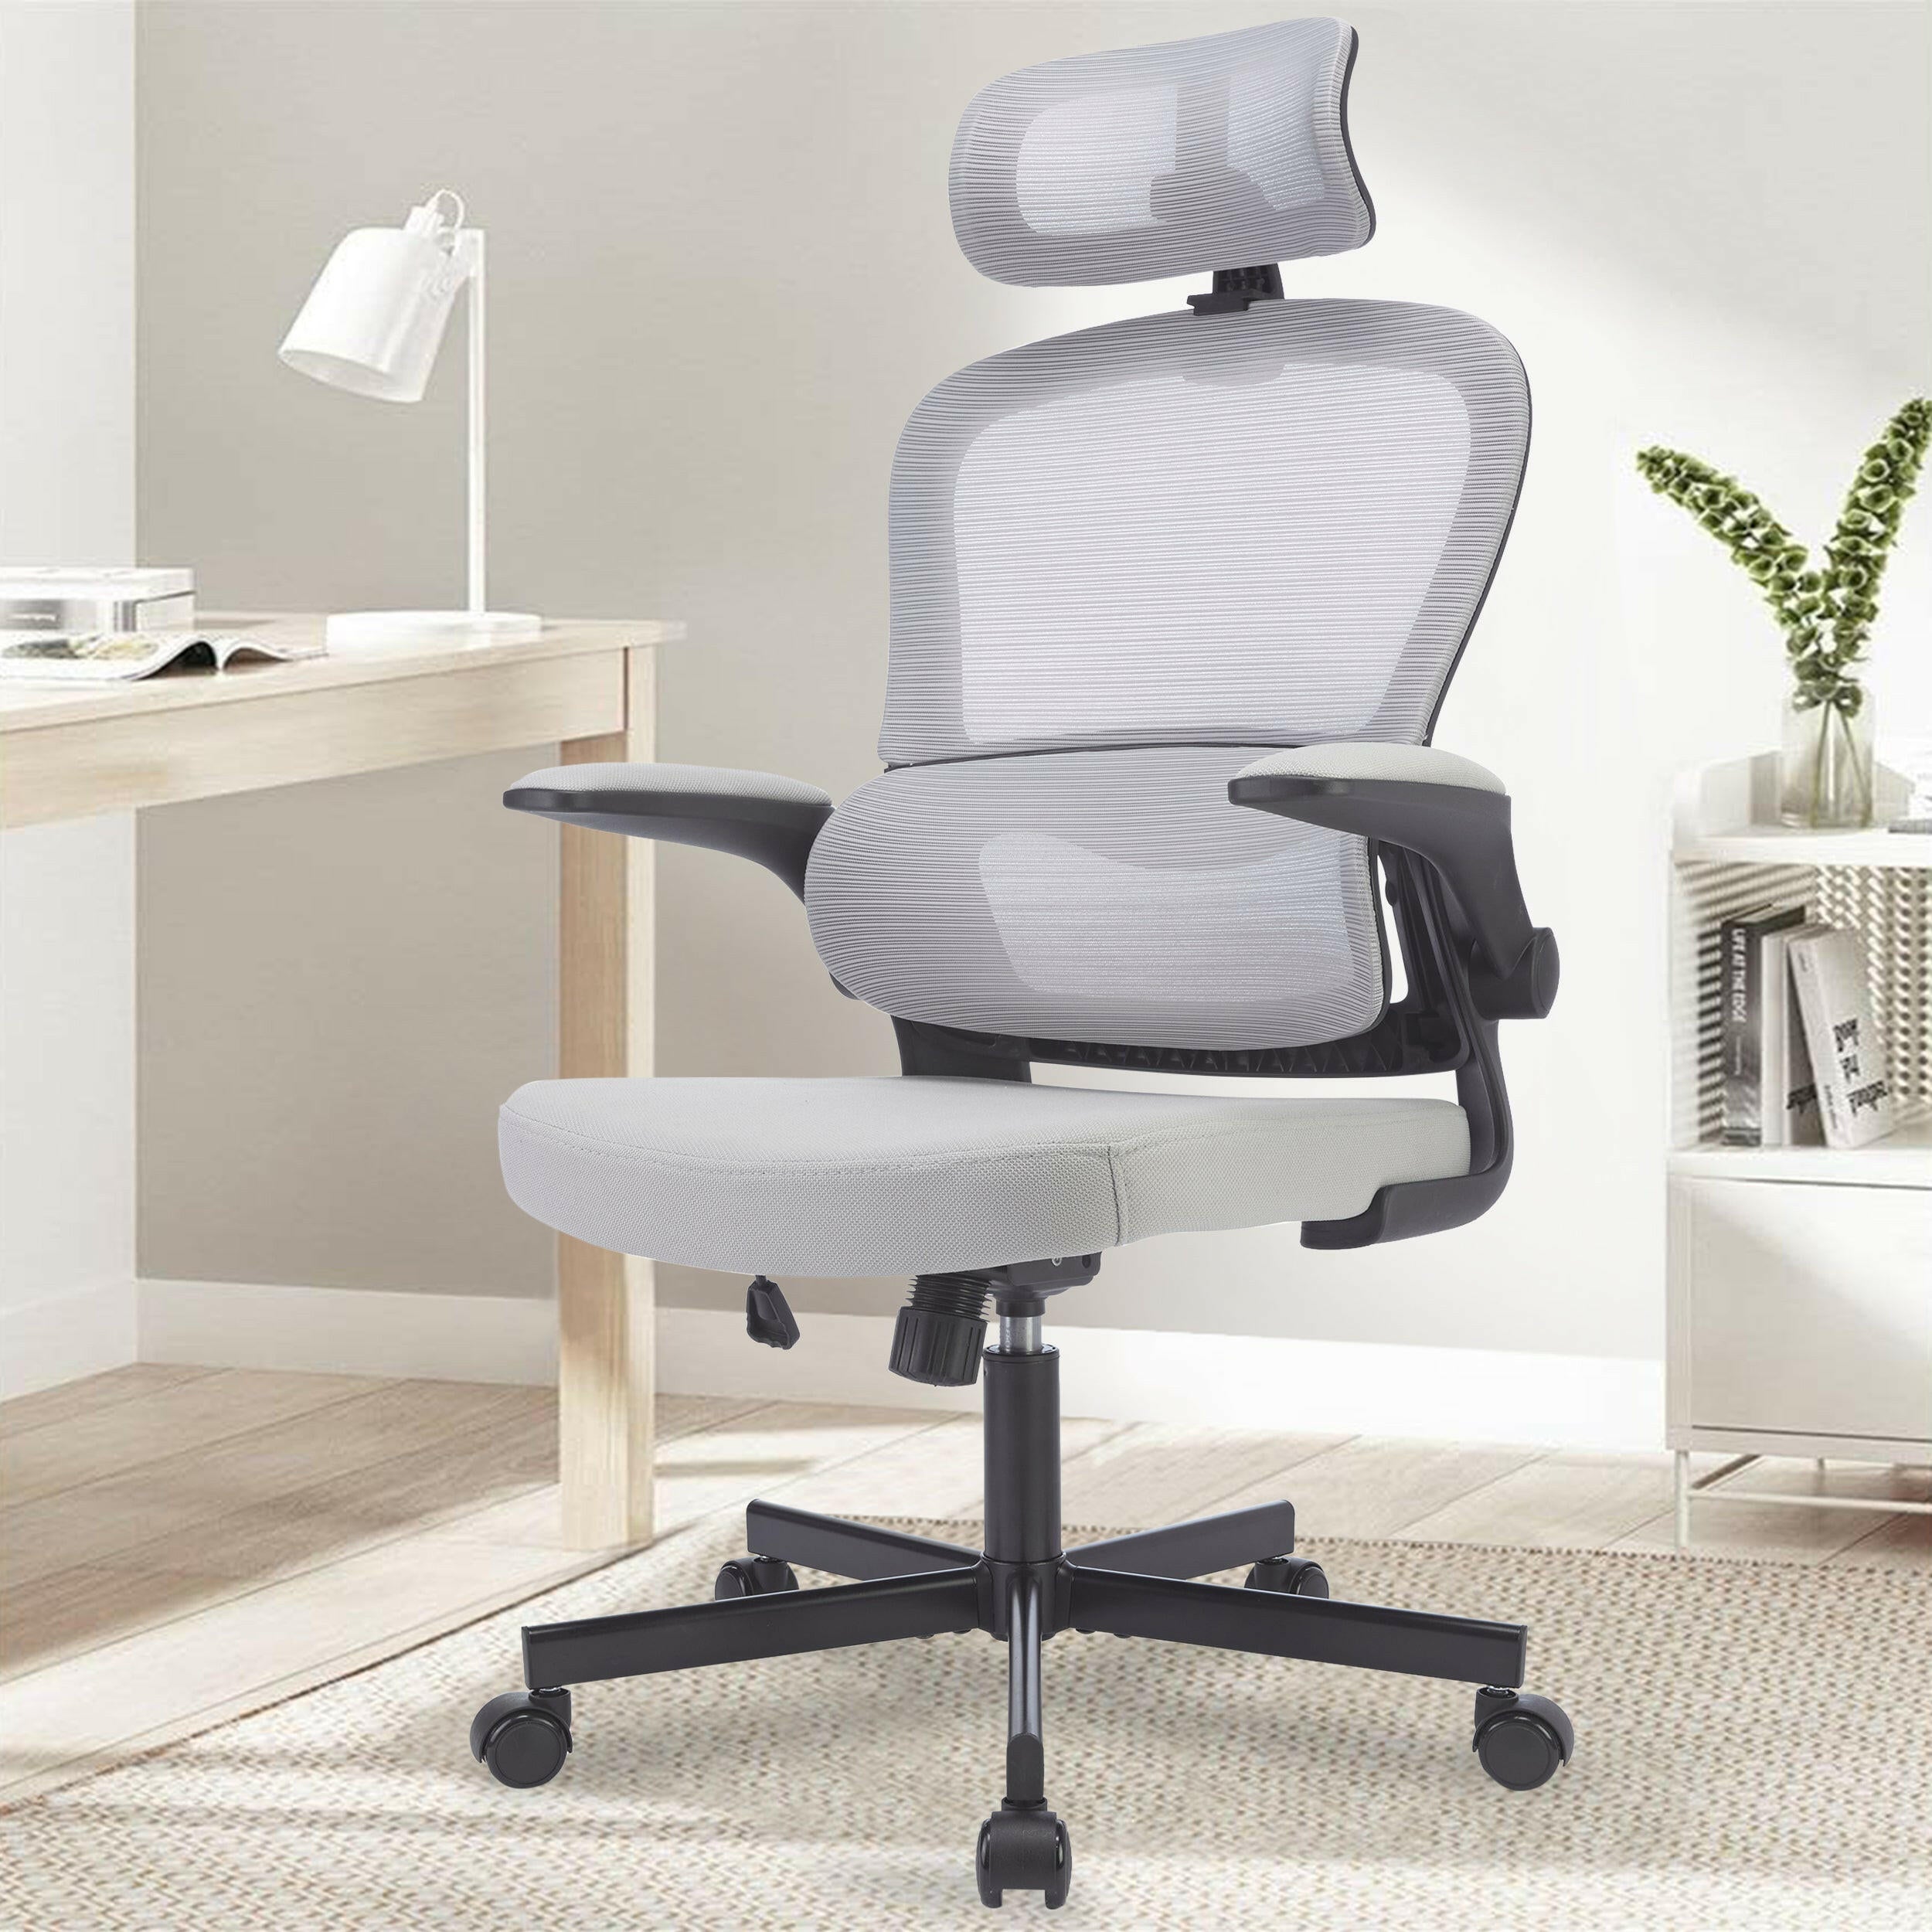 comfortable office chair